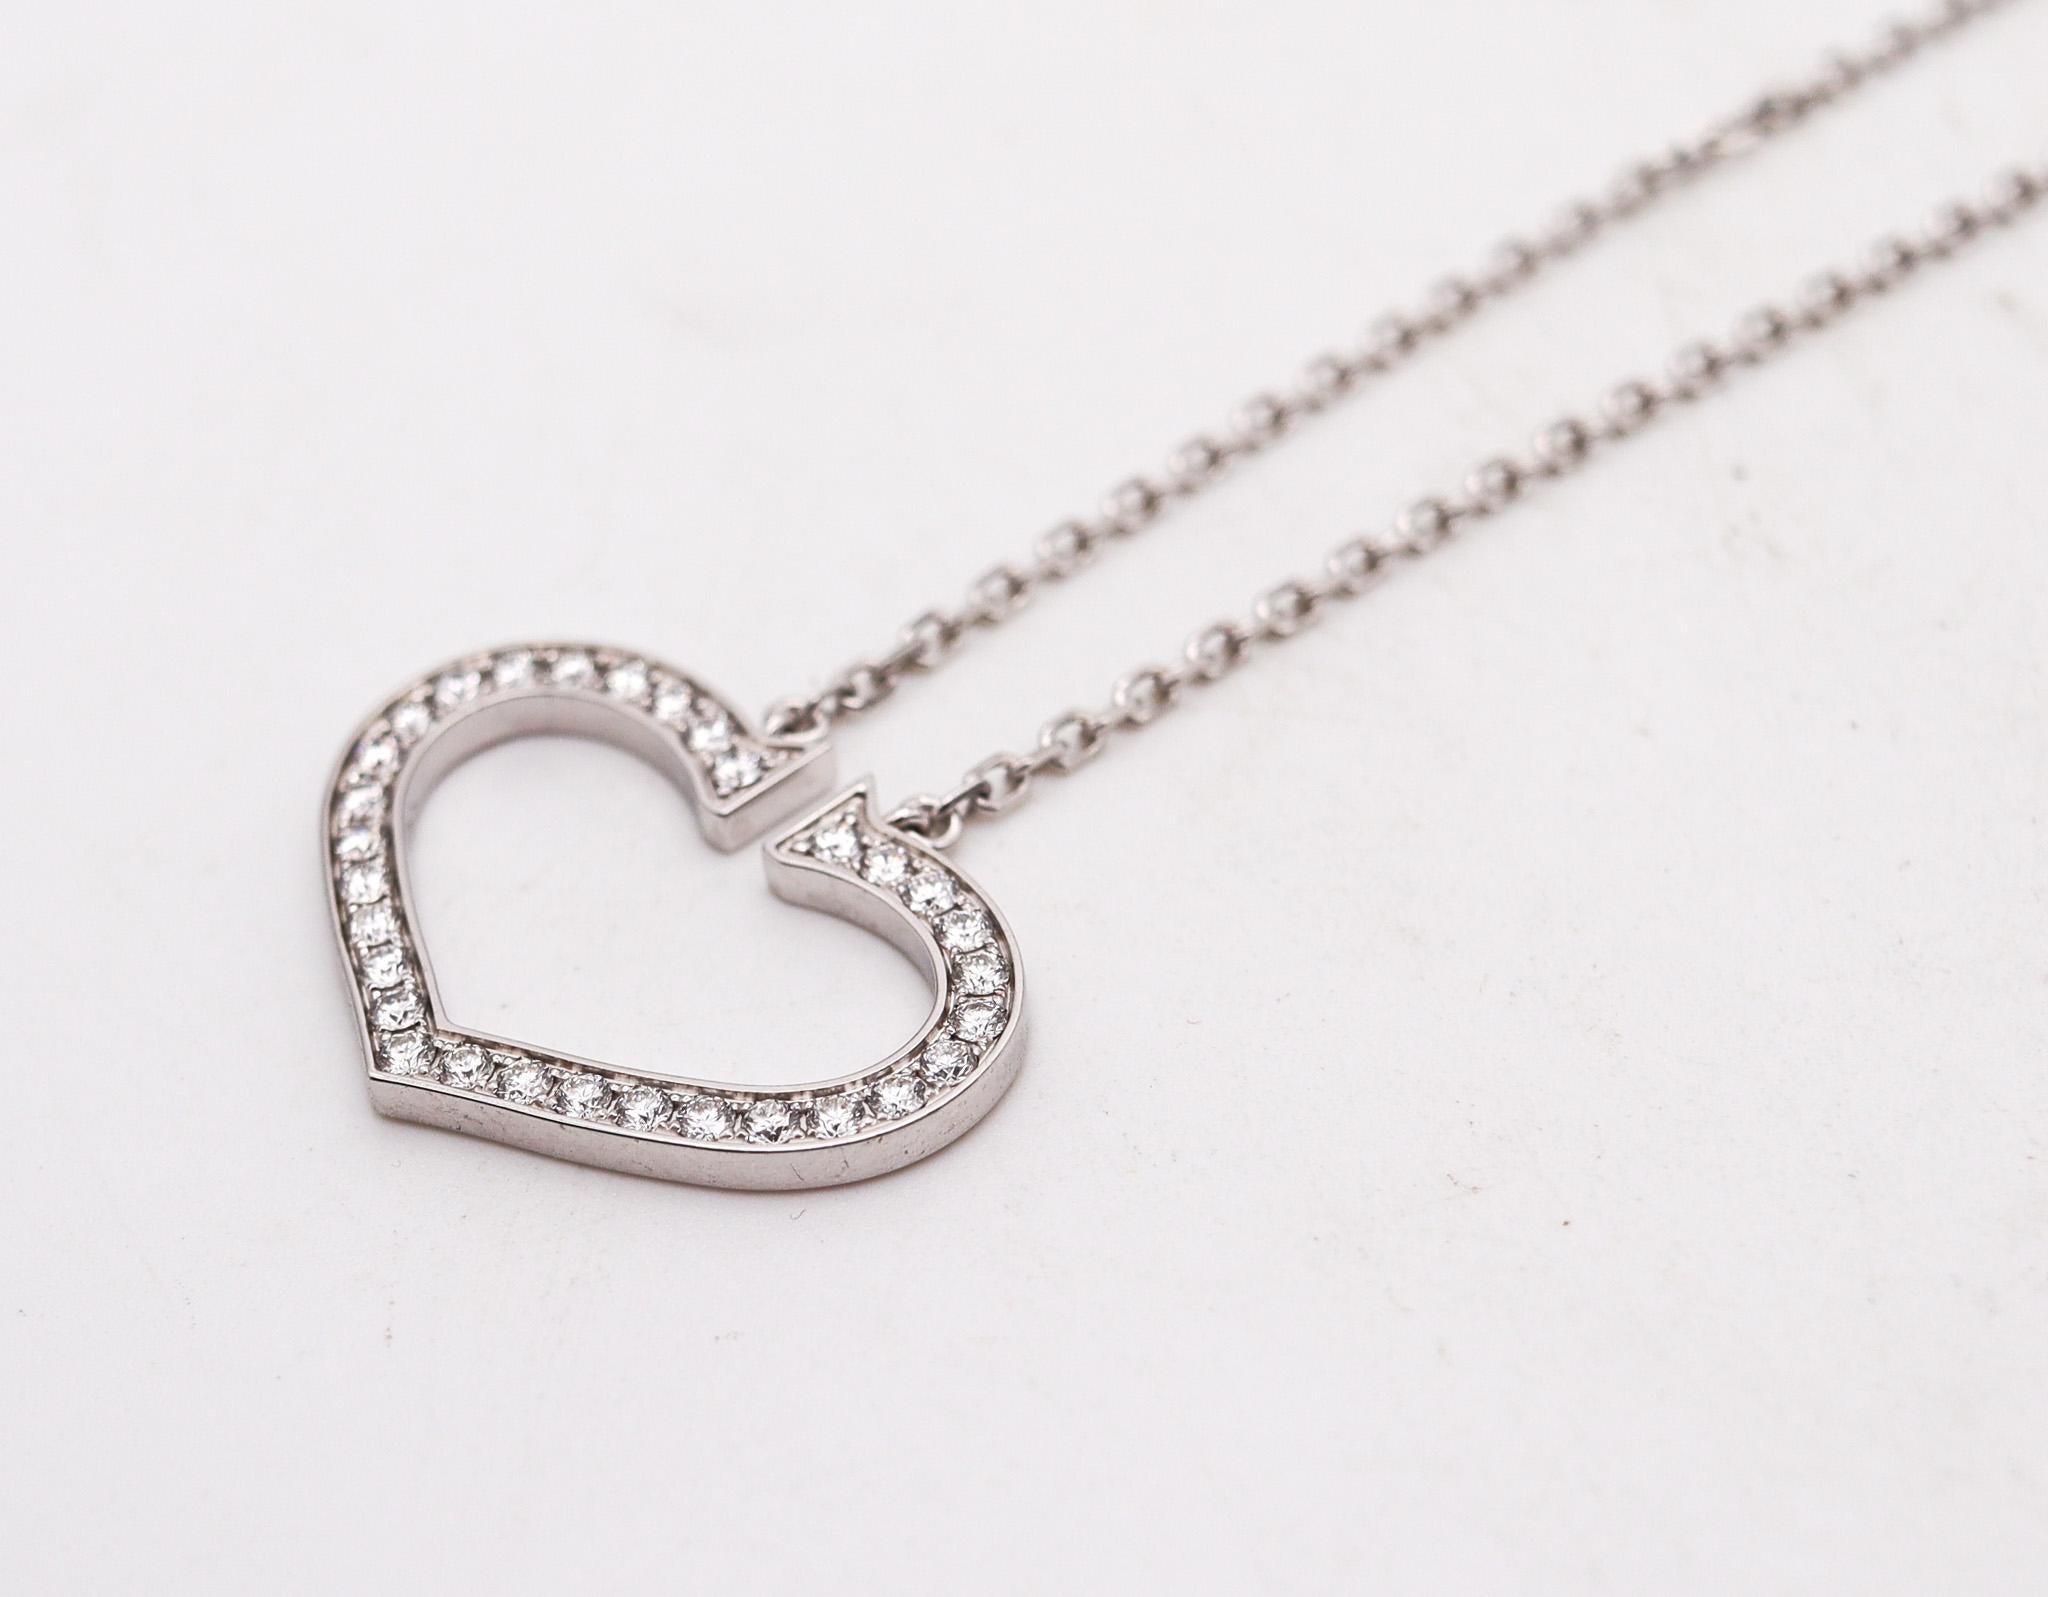 Brilliant Cut Cartier C Heart Necklace In 18Kt White Gold With 1.55 Ctw In VVS Diamonds